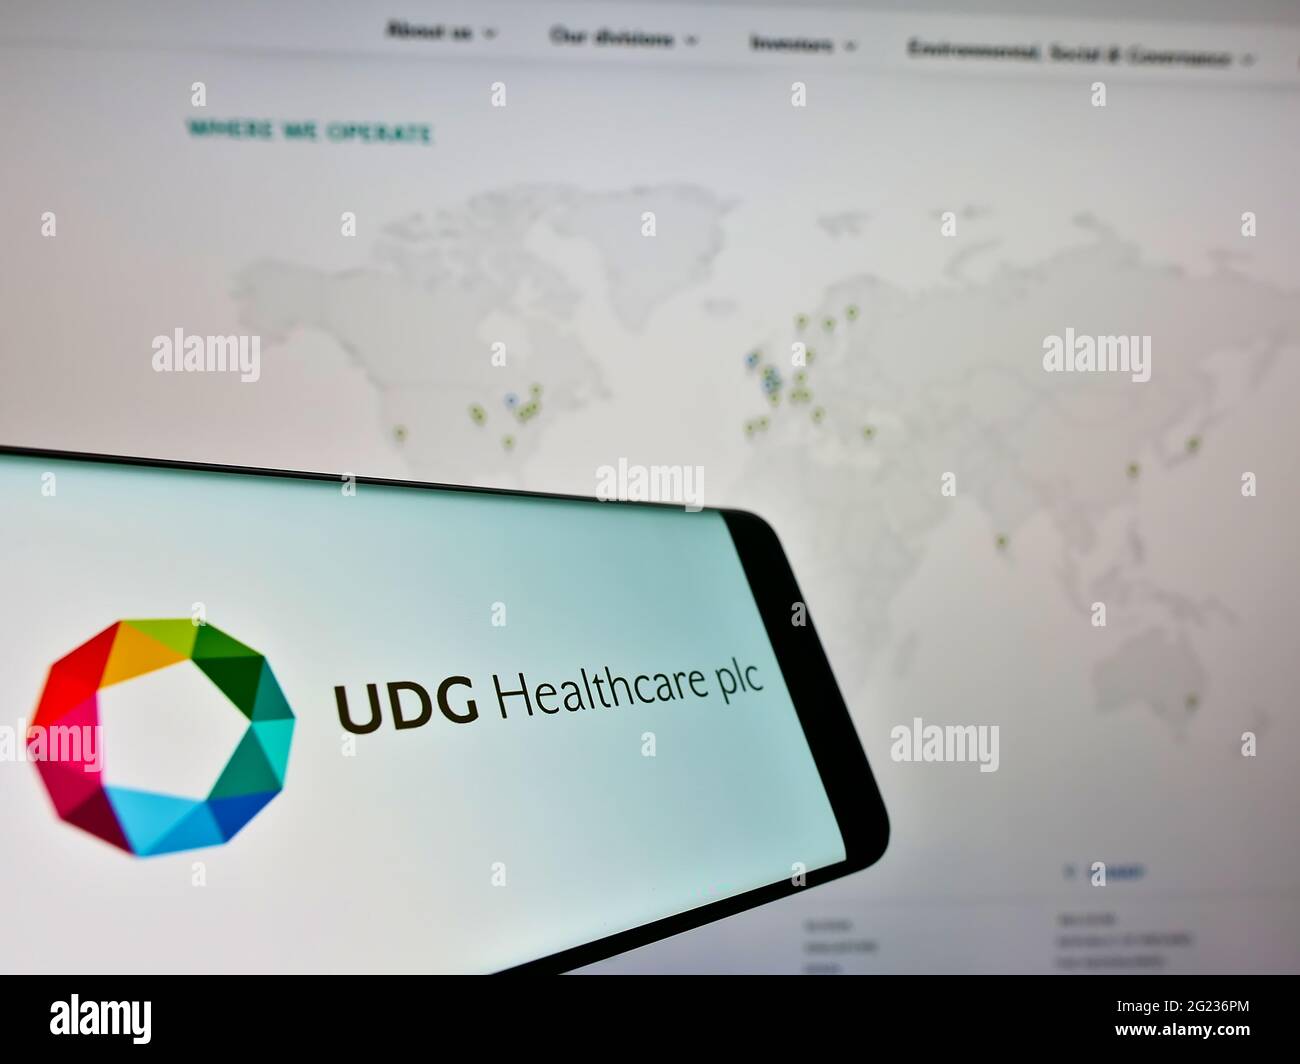 Cellphone with logo of Irish pharmaceutical company UDG Healthcare plc on screen in front of website. Focus on center-right of phone display. Stock Photo